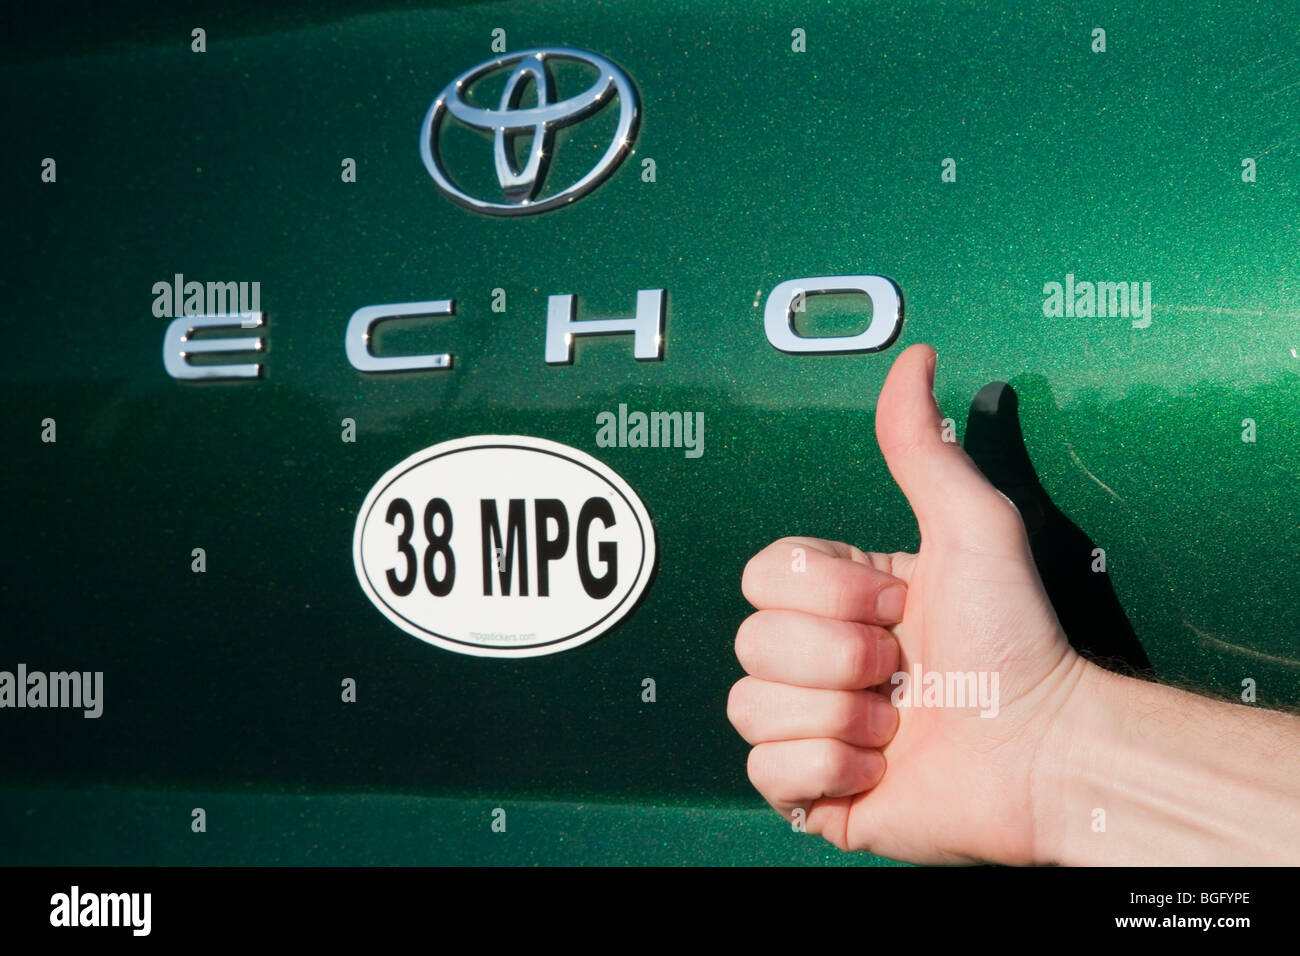 Close up of person holding thumbs up next to 38 miles per gallon fuel efficiency bumper sticker on green Toyota Echo car. Stock Photo